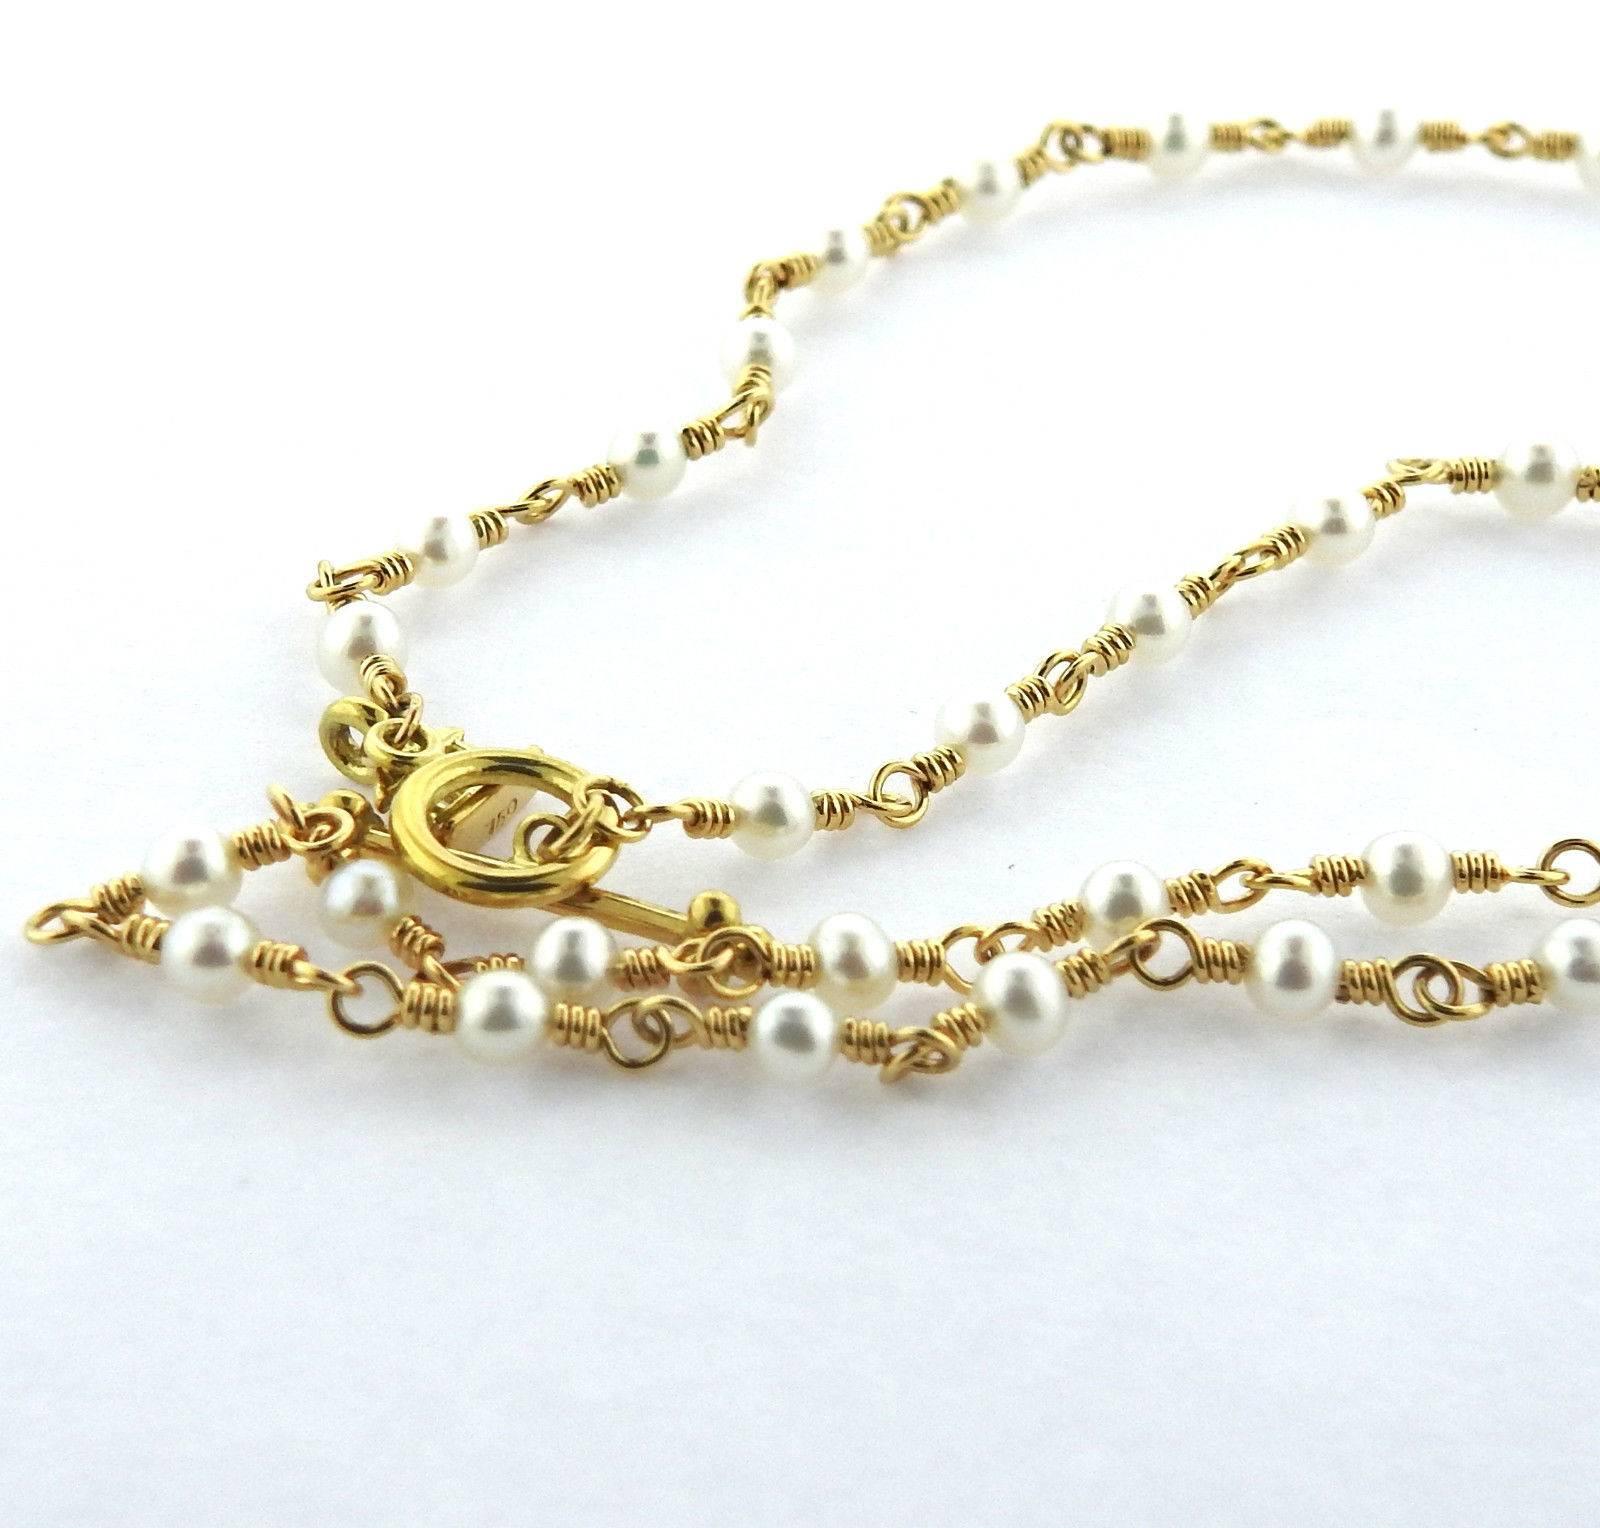 An 18k yellow gold necklace set with 3.5mm pearls.  The necklace is 18